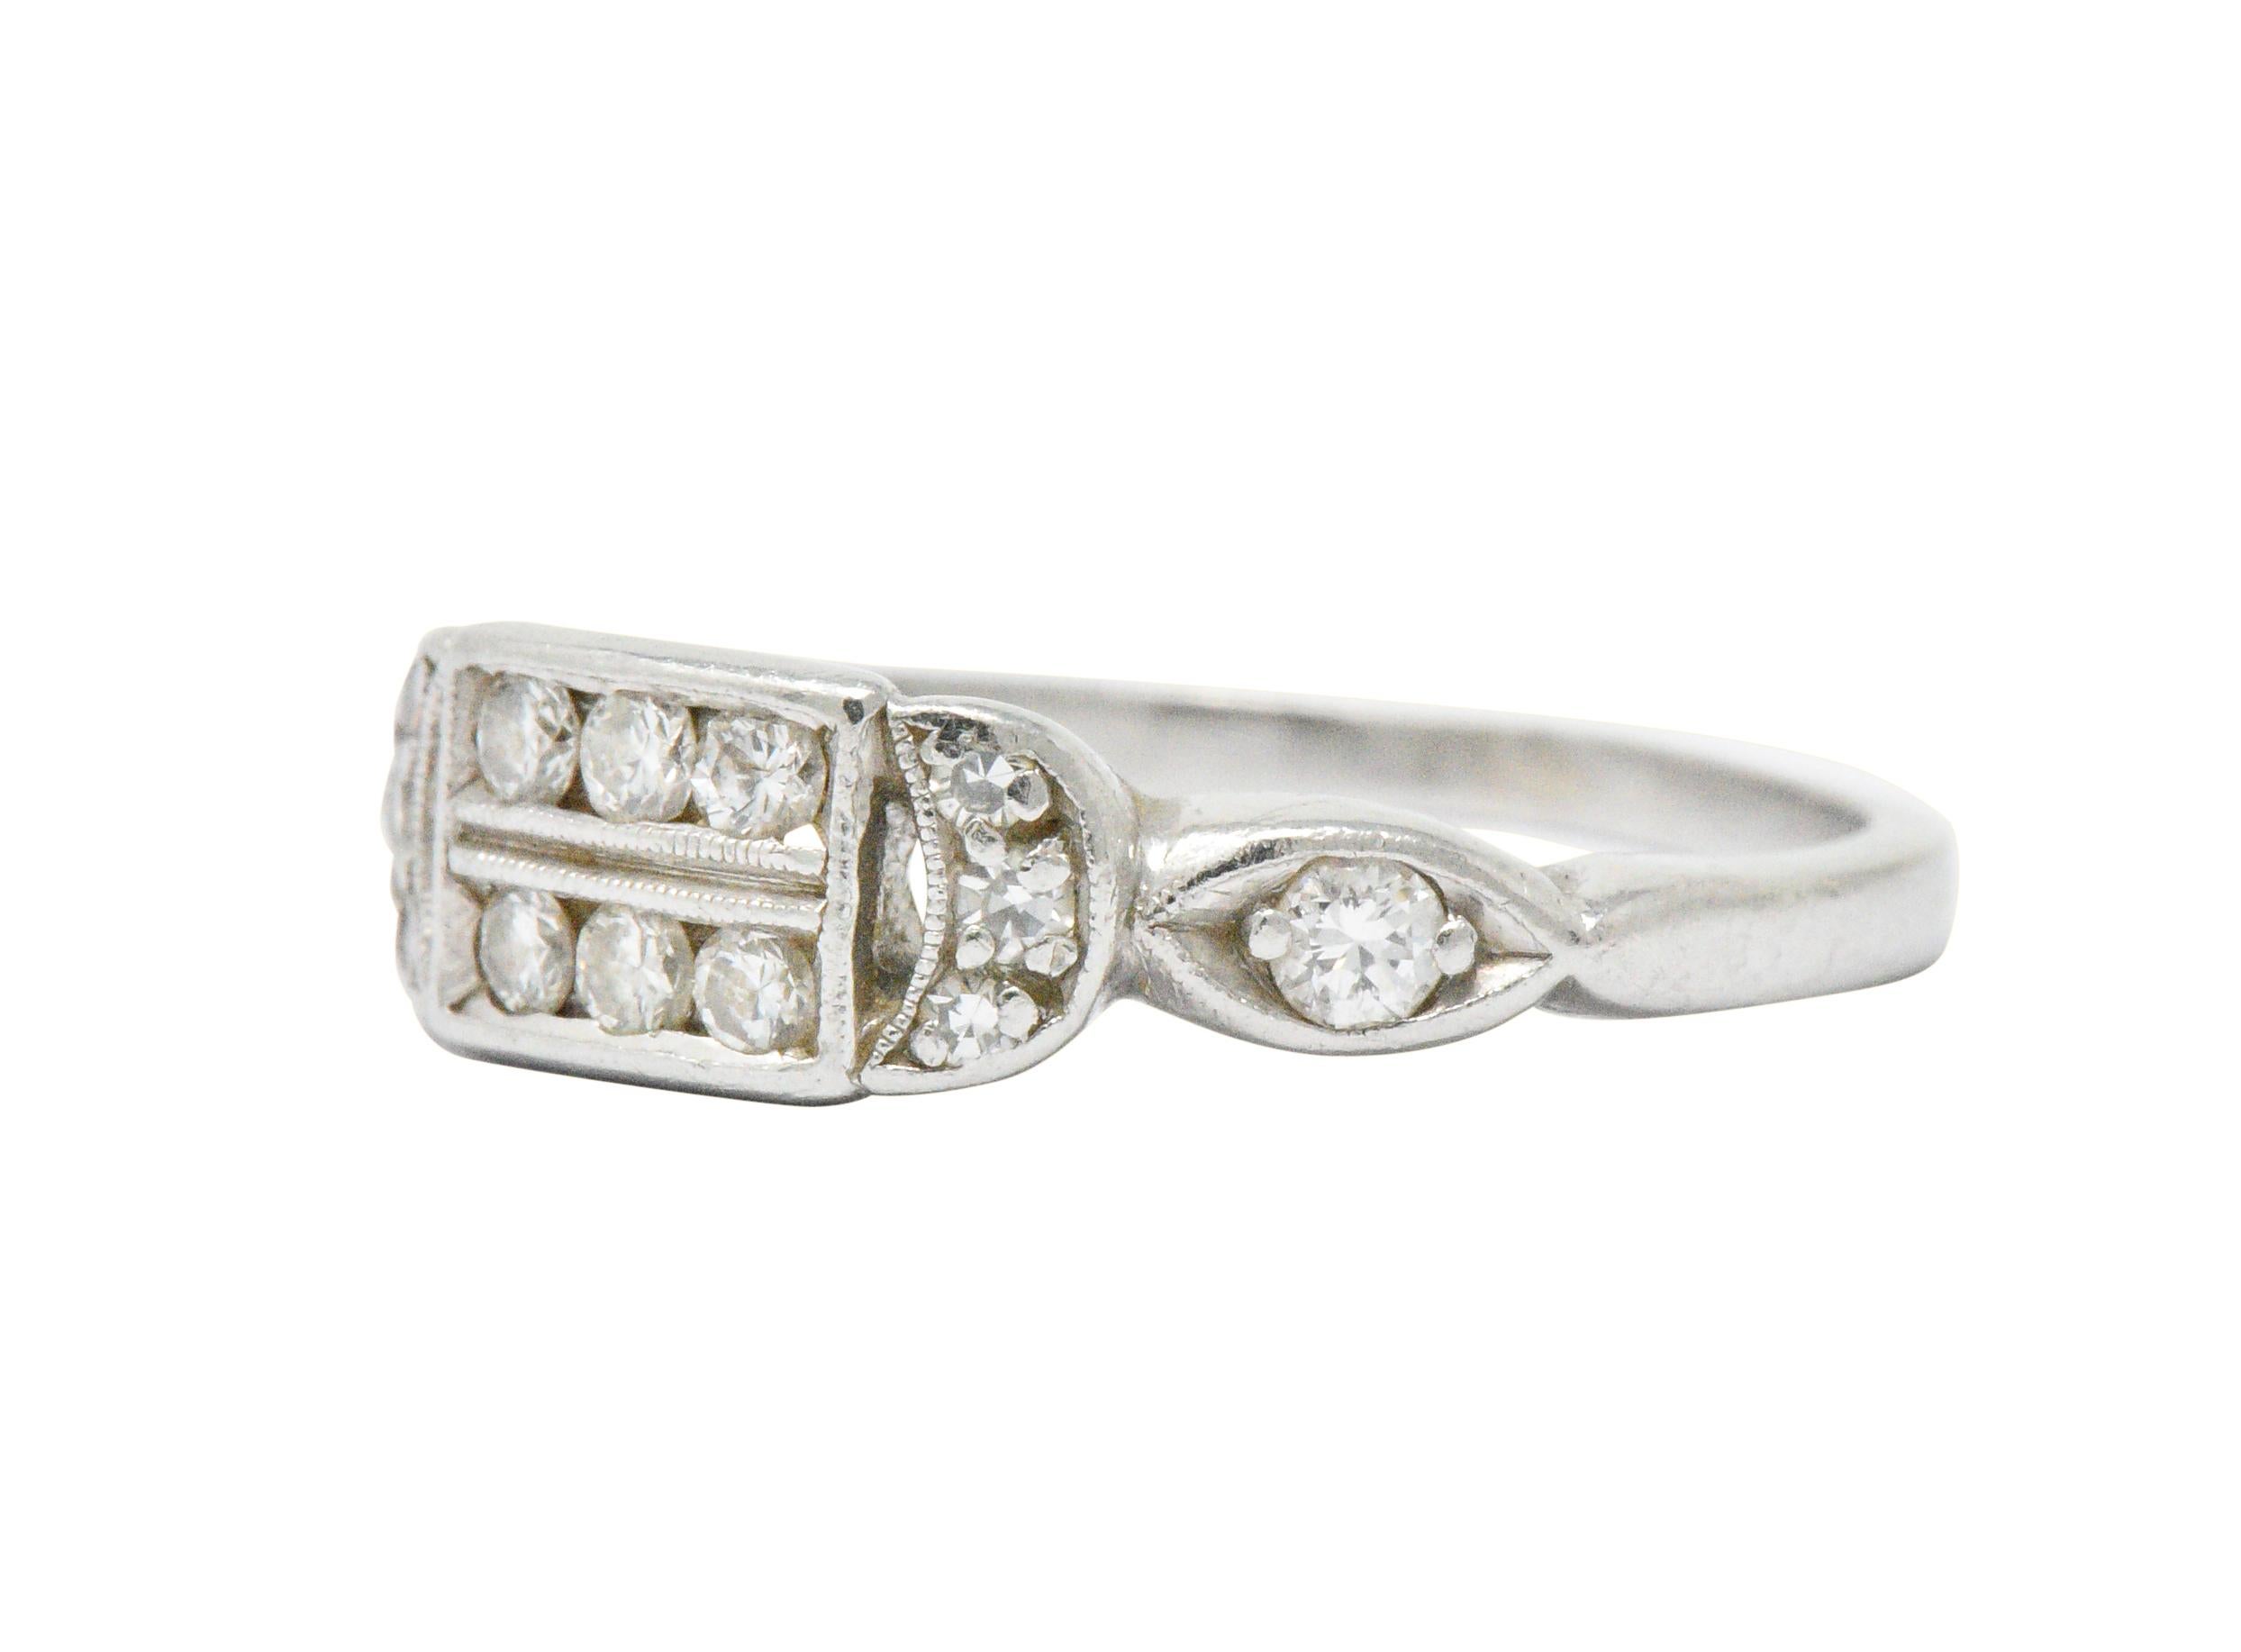 Set to the front with single and full cut diamonds, approximately 0.20 carats total, G/H color and VS to SI clarity

Elegantly designed with straight geometric and curved lines, so perfectly Art Deco

Ring Size: 4 3/4 & Sizable

The top of the ring